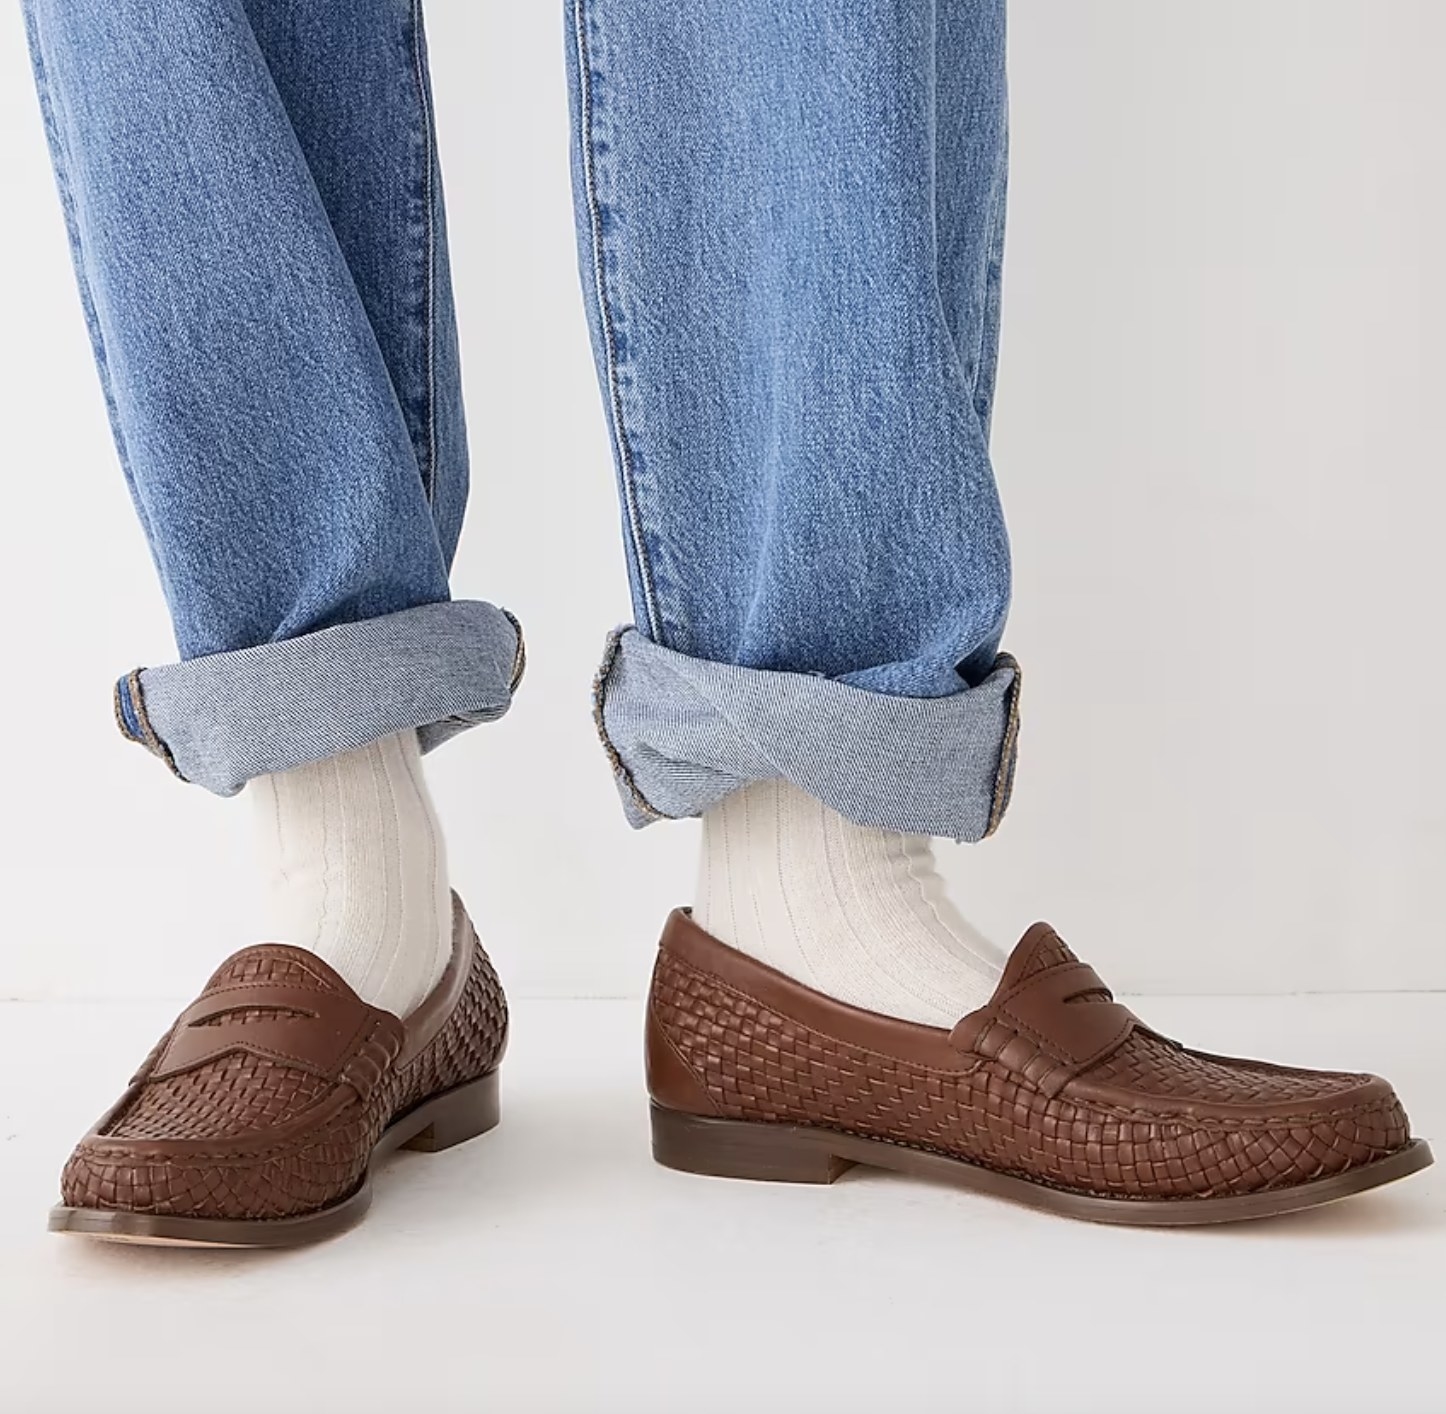 someone wearing jeans wearing brown penny loafers